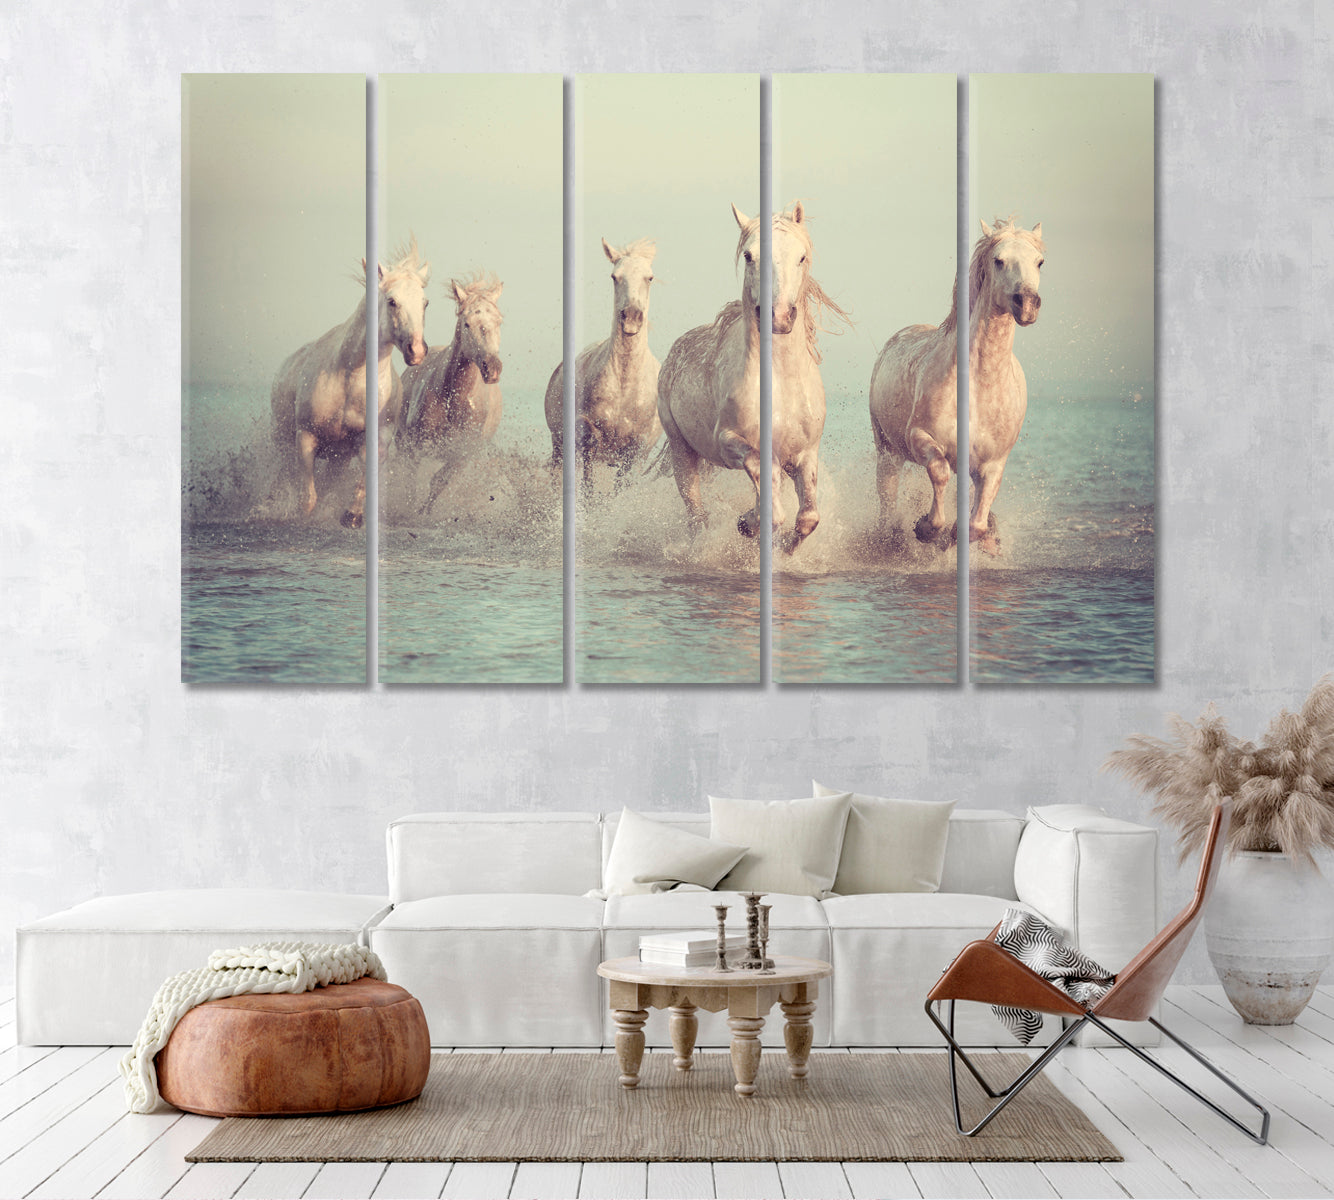 Herd of White Horses Running in Sea Canvas Print ArtLexy 5 Panels 36"x24" inches 